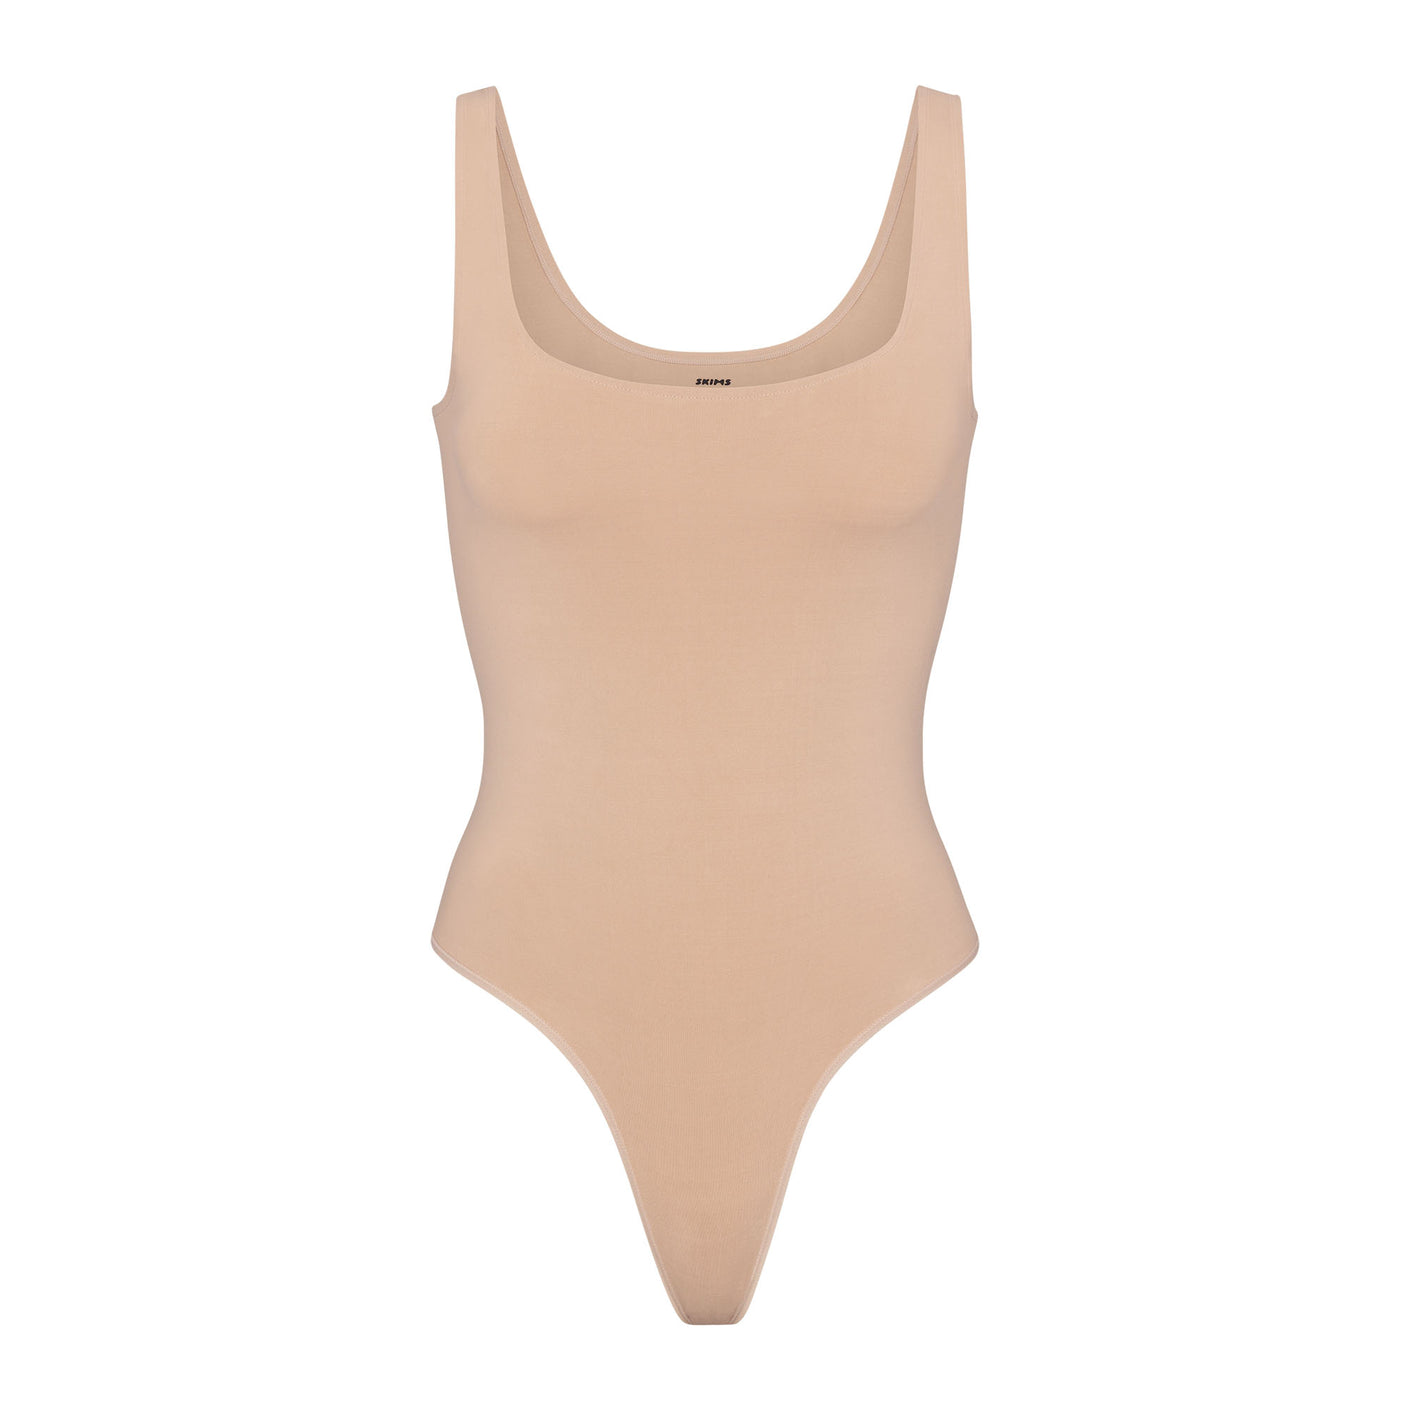 New Women's SKIMS Clay Soft Smoothing Thong Bodysuit Size Plus 1X 